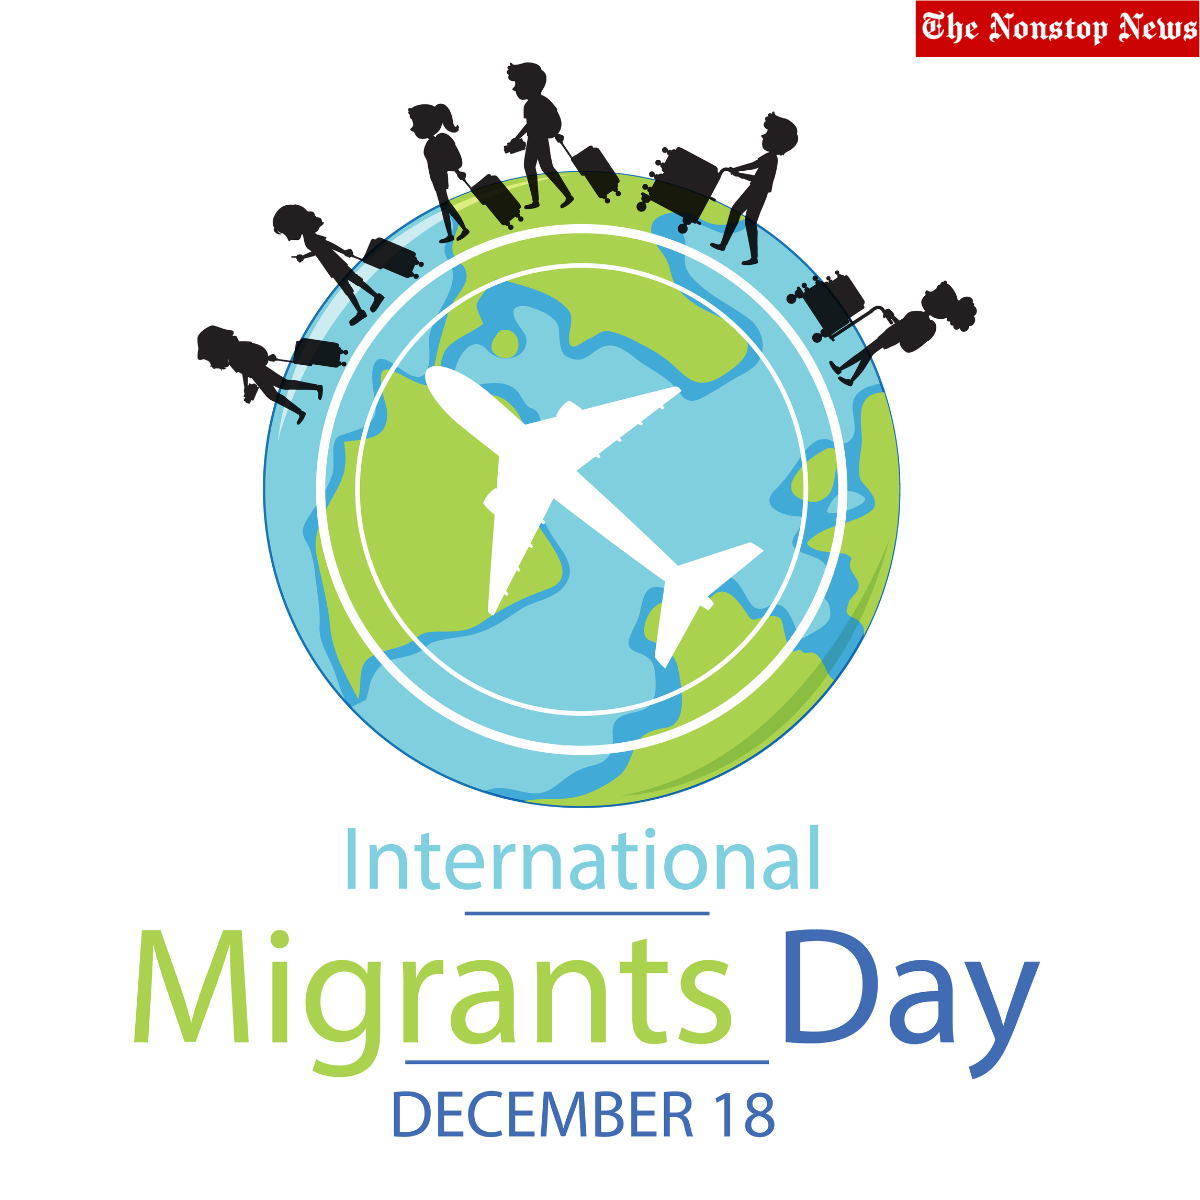 International Migrants Day 2022 Instagram Captions, Slogans, Quotes, Messages, Posters, Banners and Images